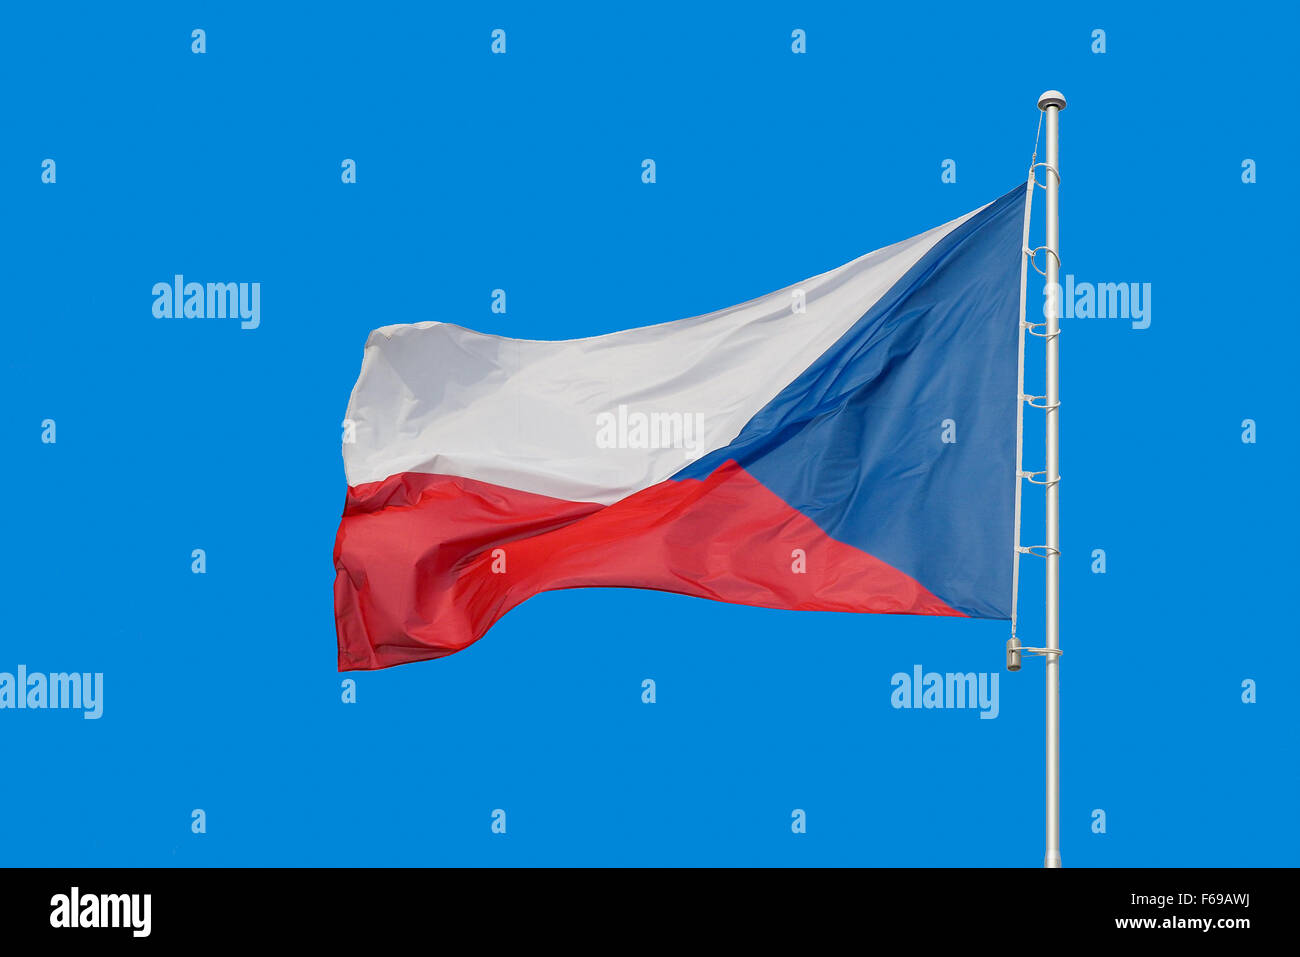 Flag of Czech Republic on pole, with text space around it and blue sky background. Stock Photo